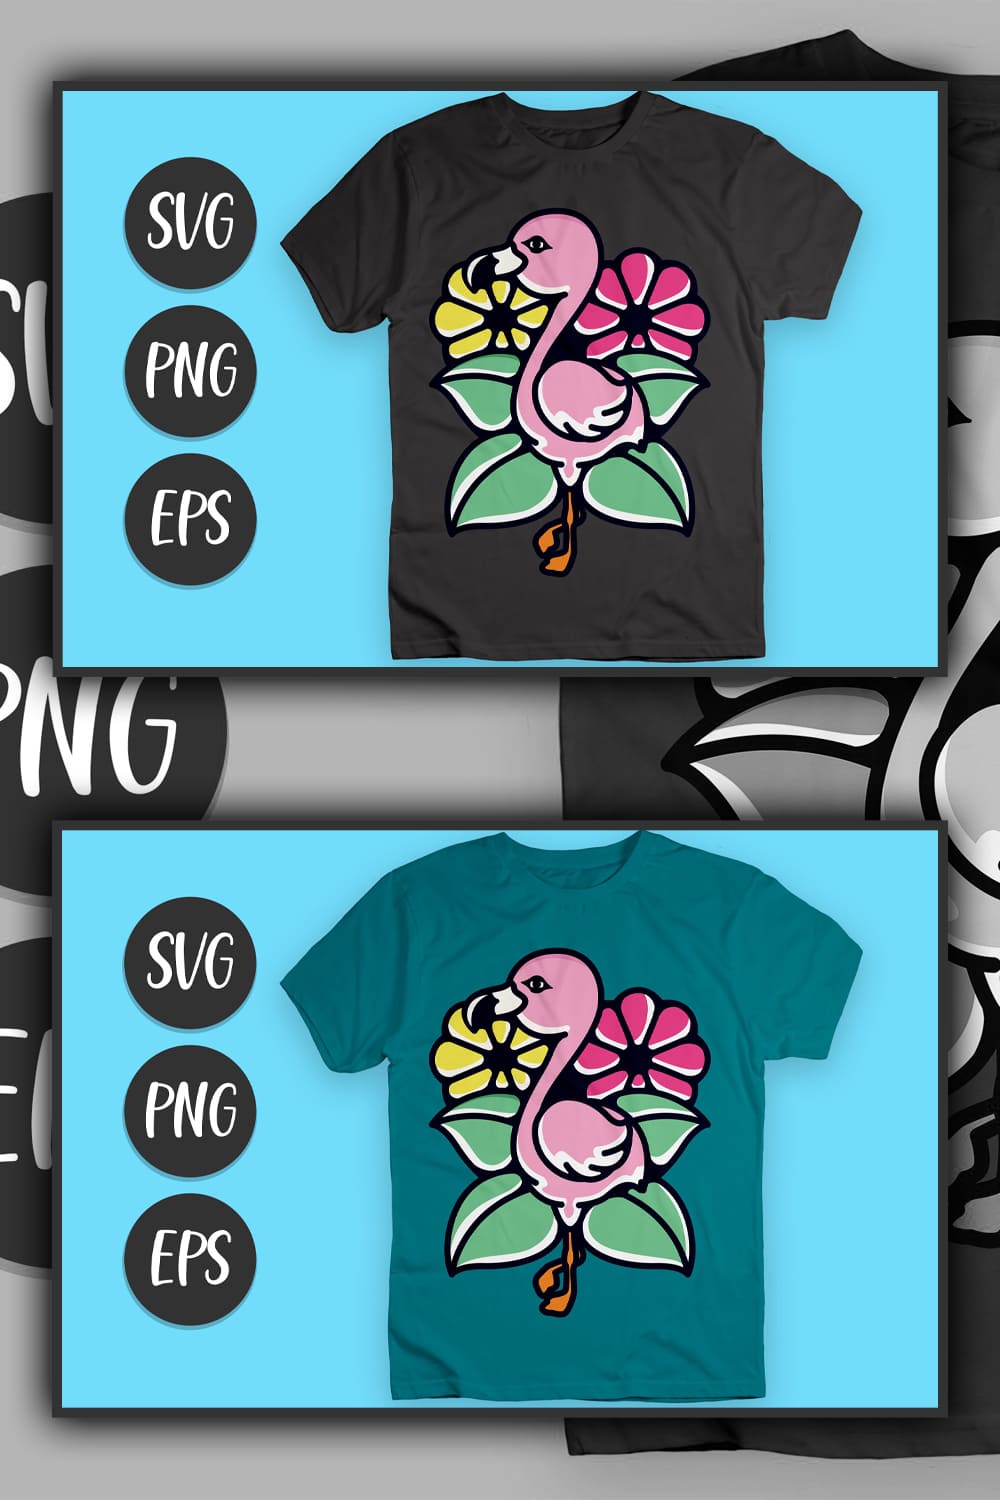 A pink flamingo among tropical plants is painted on two colored t-shirts.